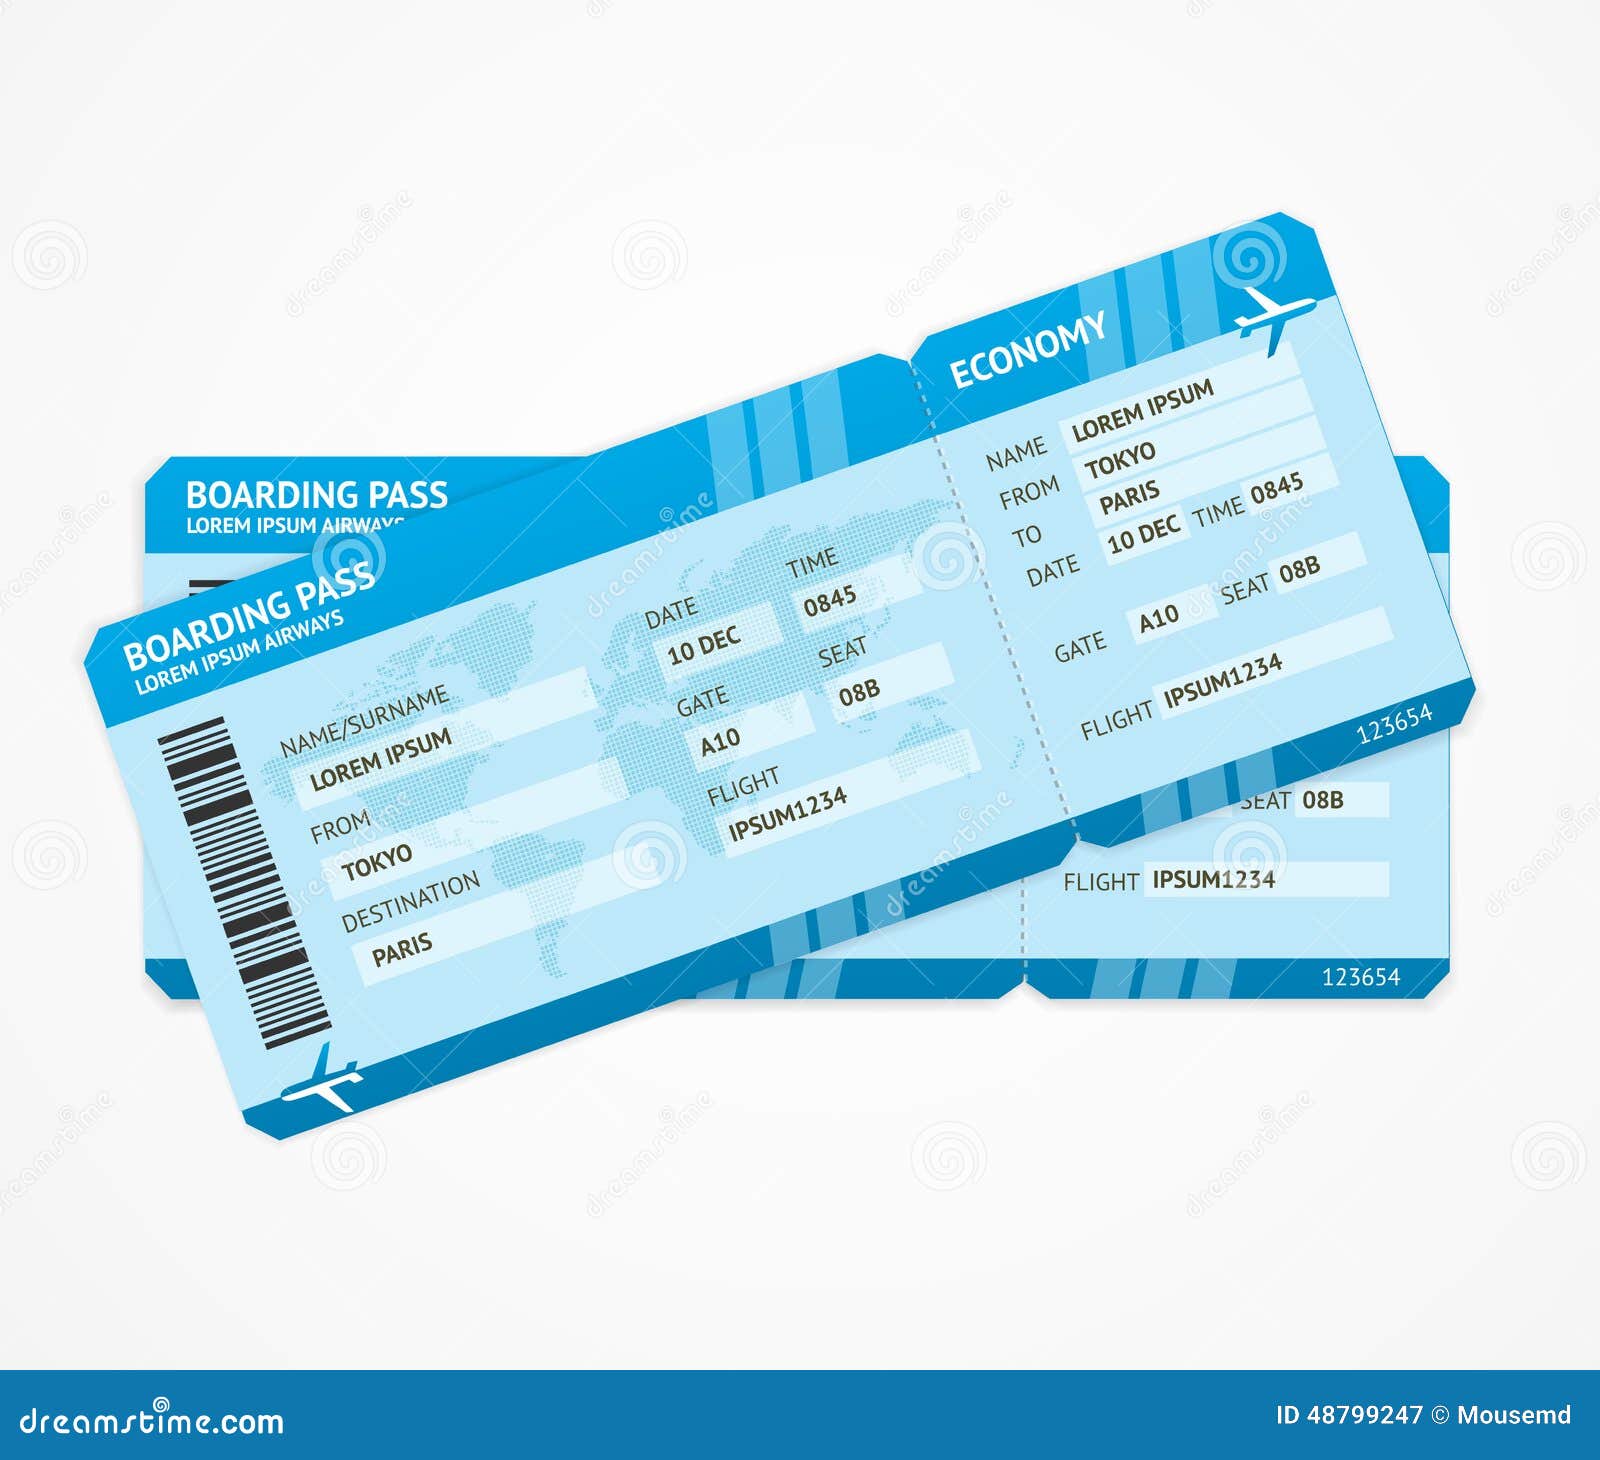 free clip art airline ticket - photo #22